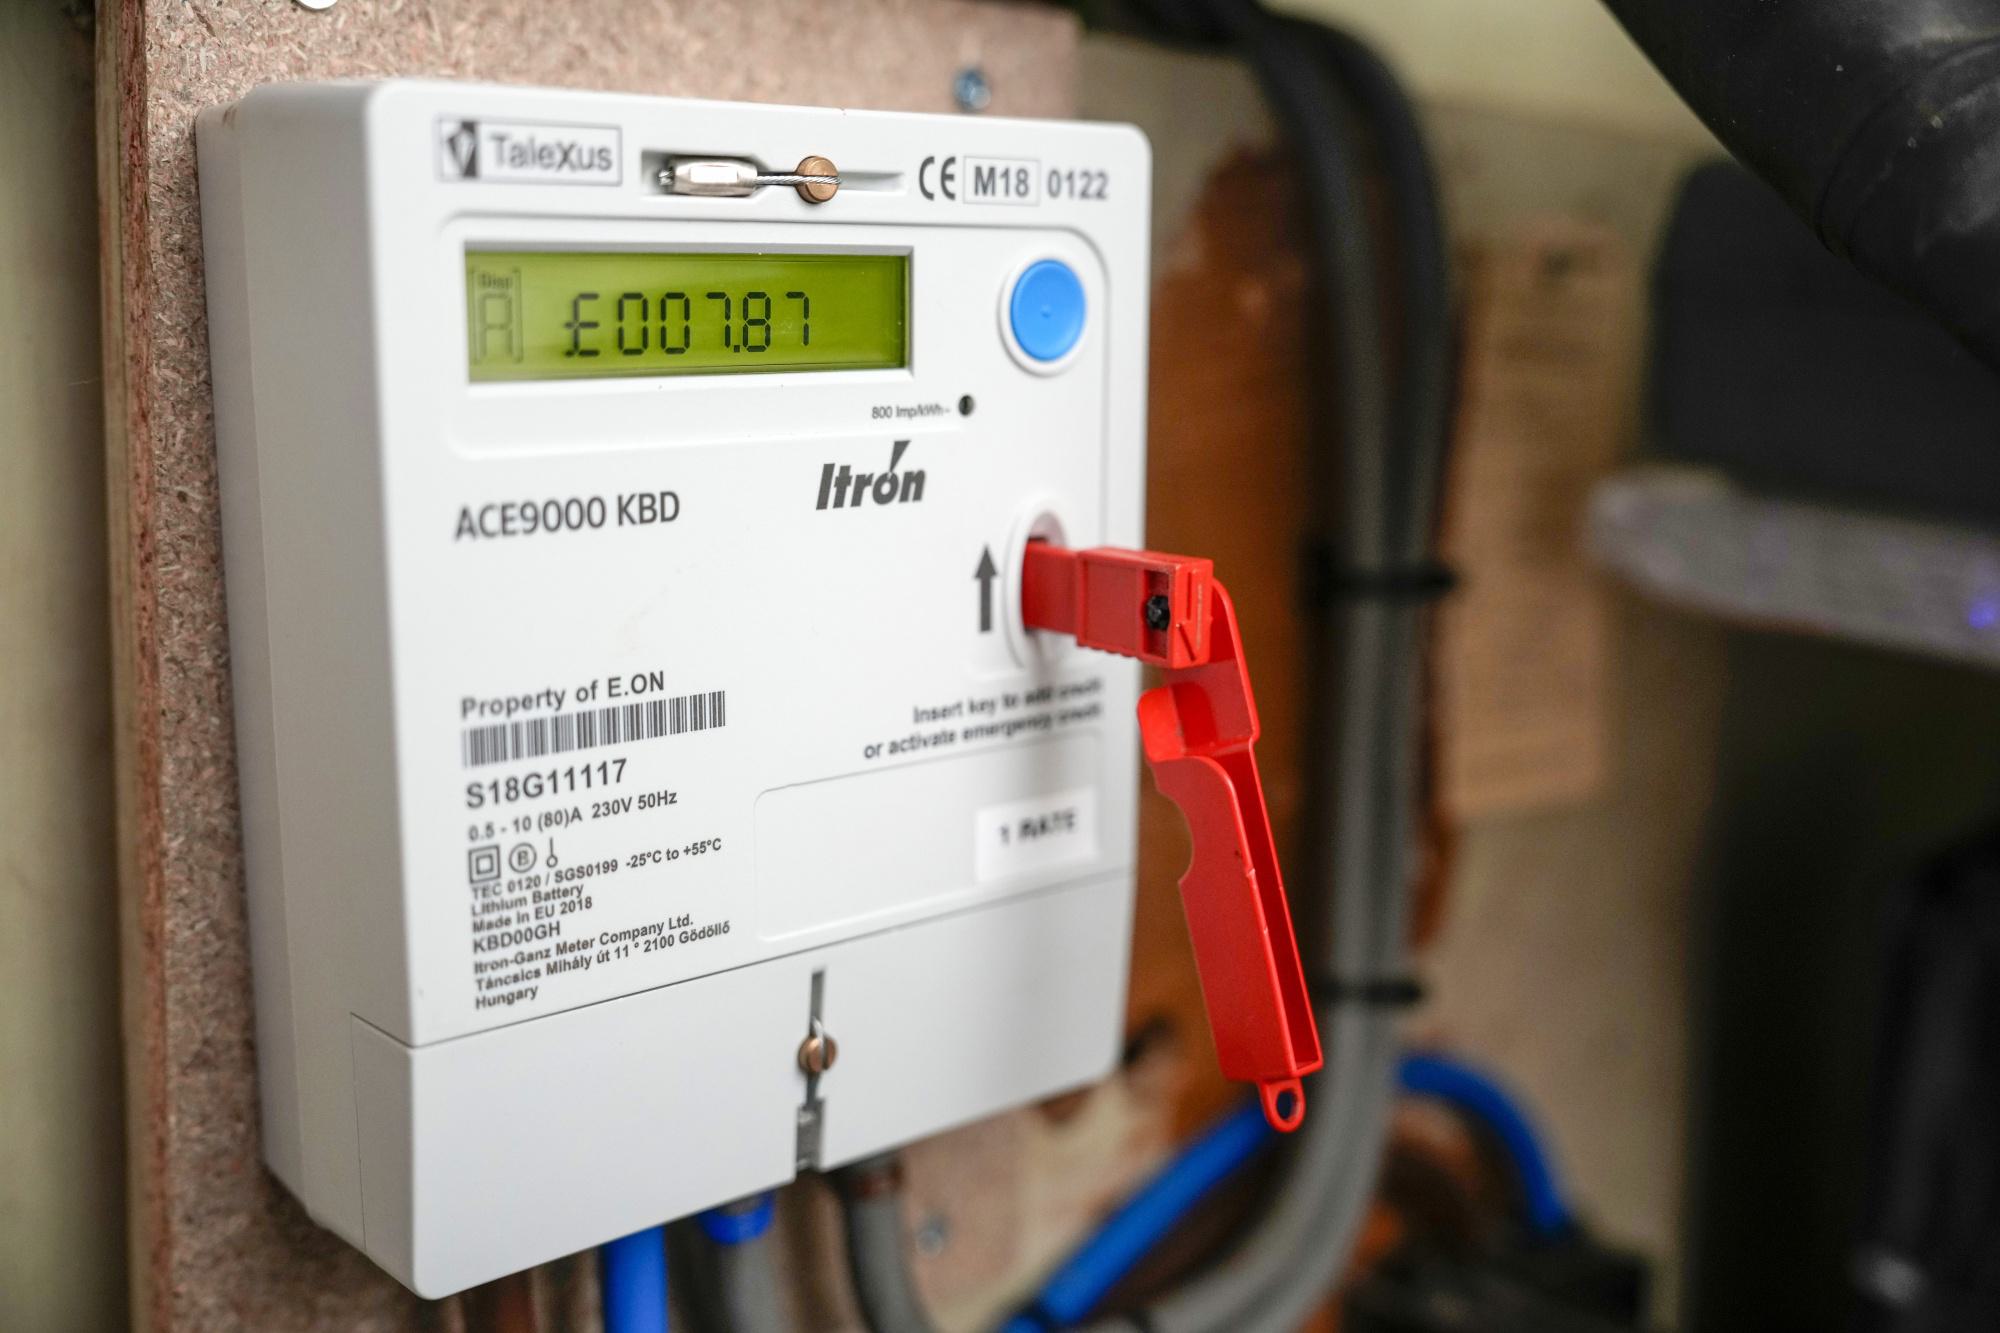  Ofgem Grants Permission for Energy Suppliers to Resume Forcibly Installing Prepayment Meters with Strict Conditions